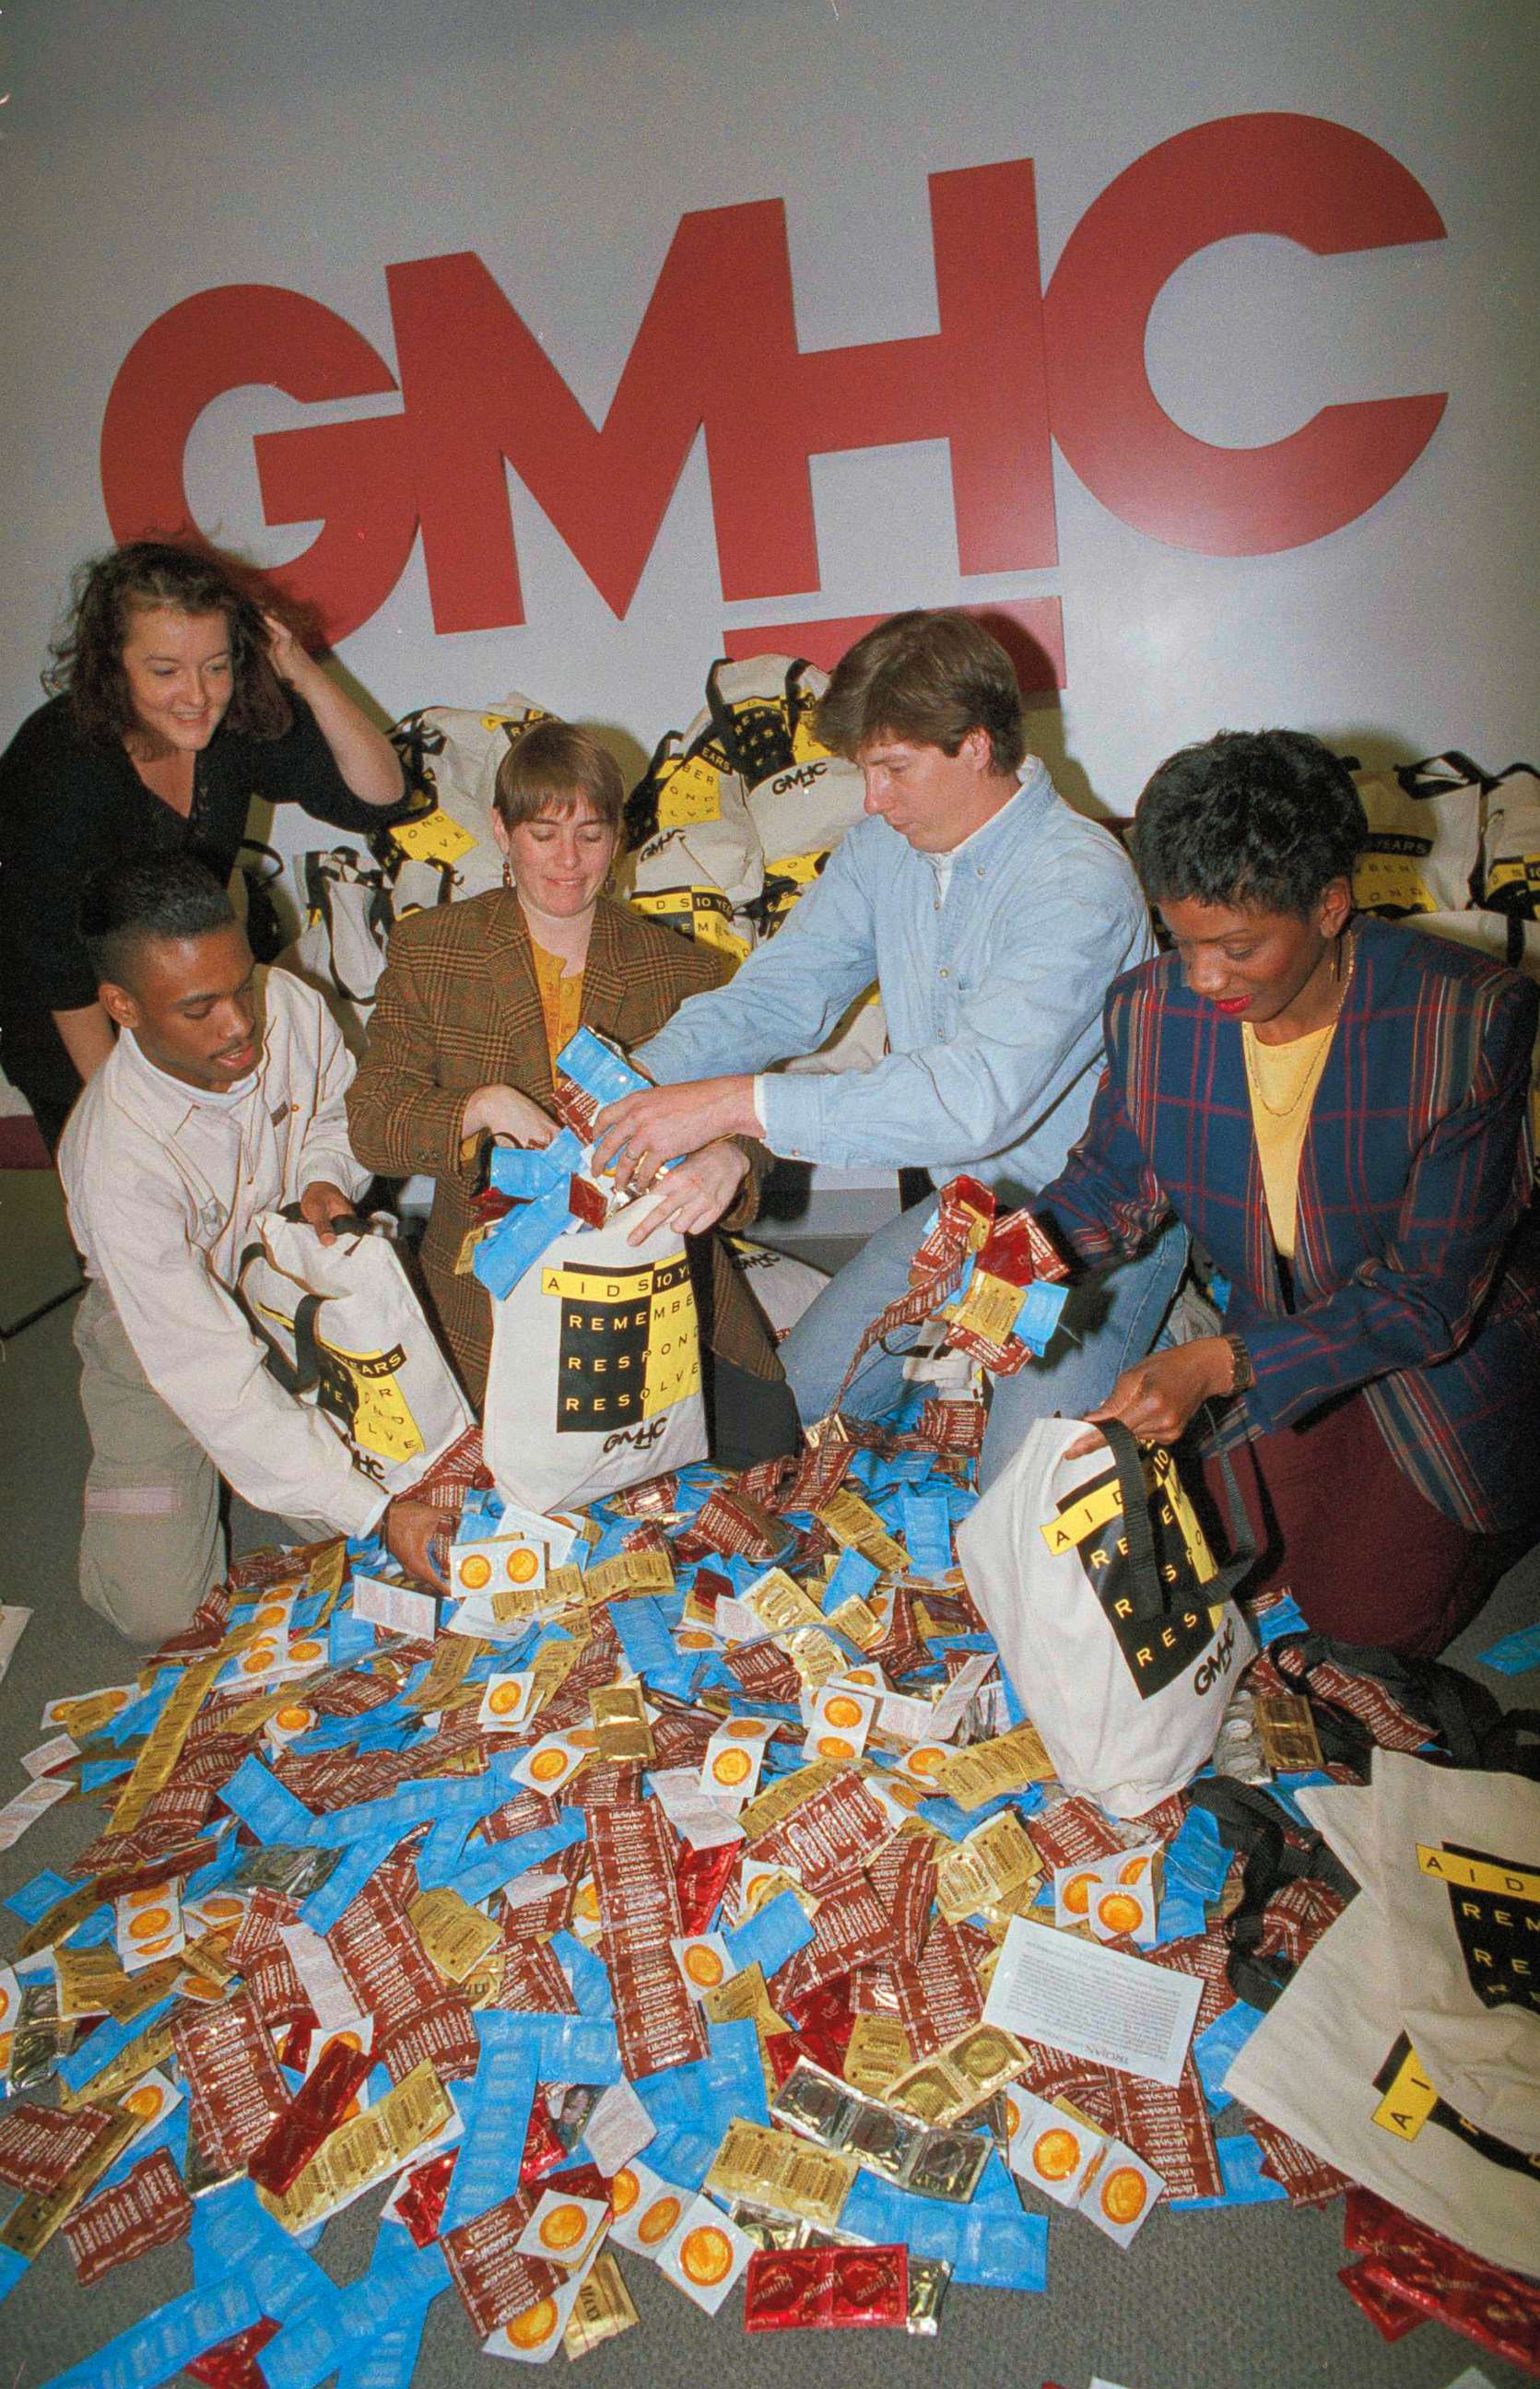 PHOTO: Volunteers at the Gay Mens' Health Crisis in New York load bags with condoms for distribution with leaflets promoting safe sex and AIDS awareness, Nov. 25, 1991.